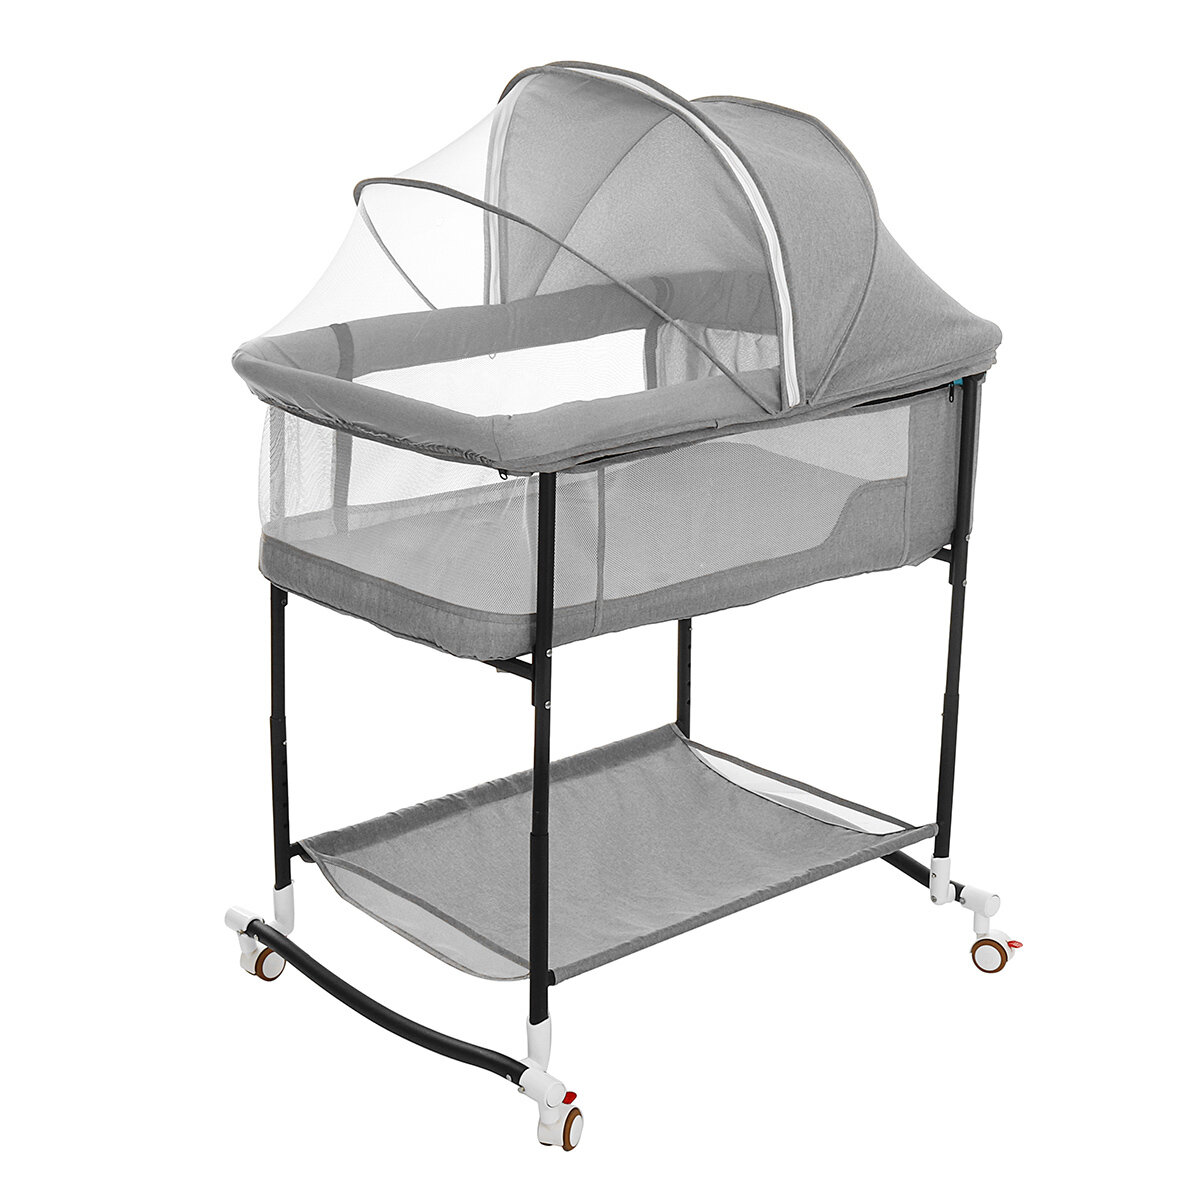 Image of 4-In-1 Infant Bedside Crib Portable Baby Sleeper Adjustable Height Stitching Big Bed for 0-36 Months Children